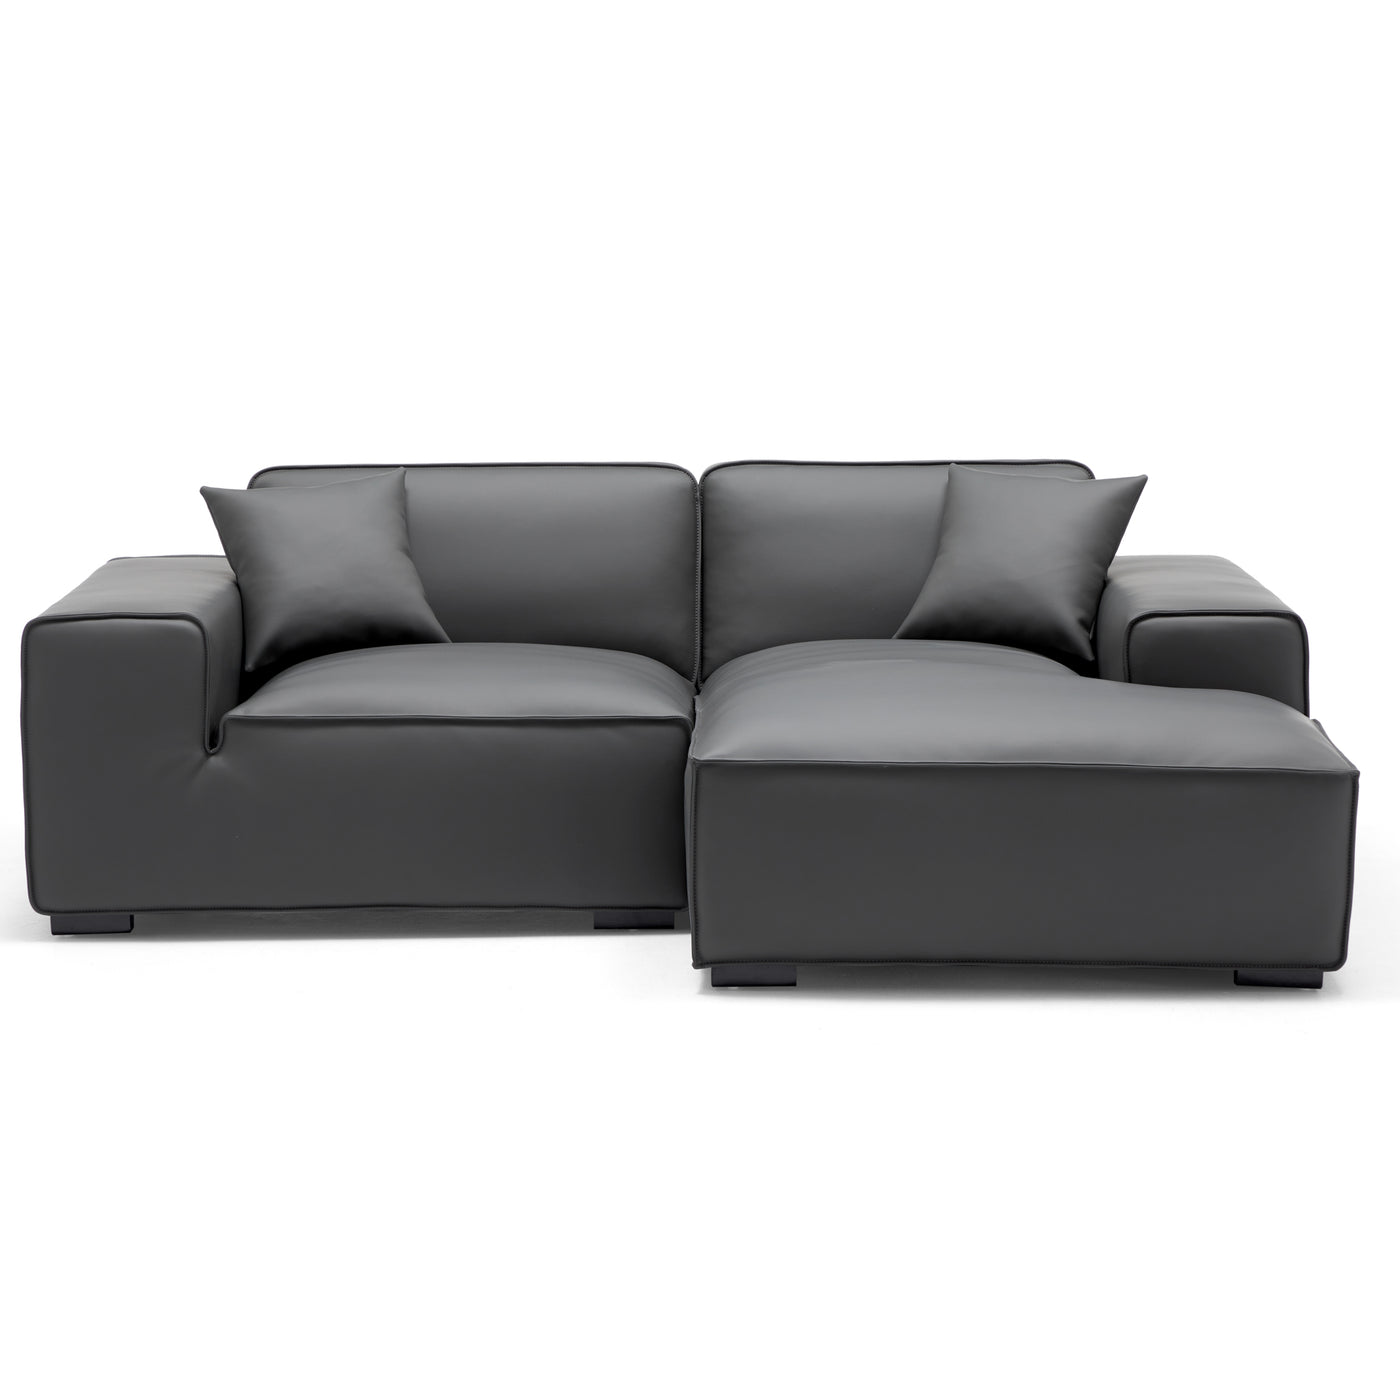 Domus Modular Beige Leather Sectional Sofa-Dark Gray-90.6"-Facing Right